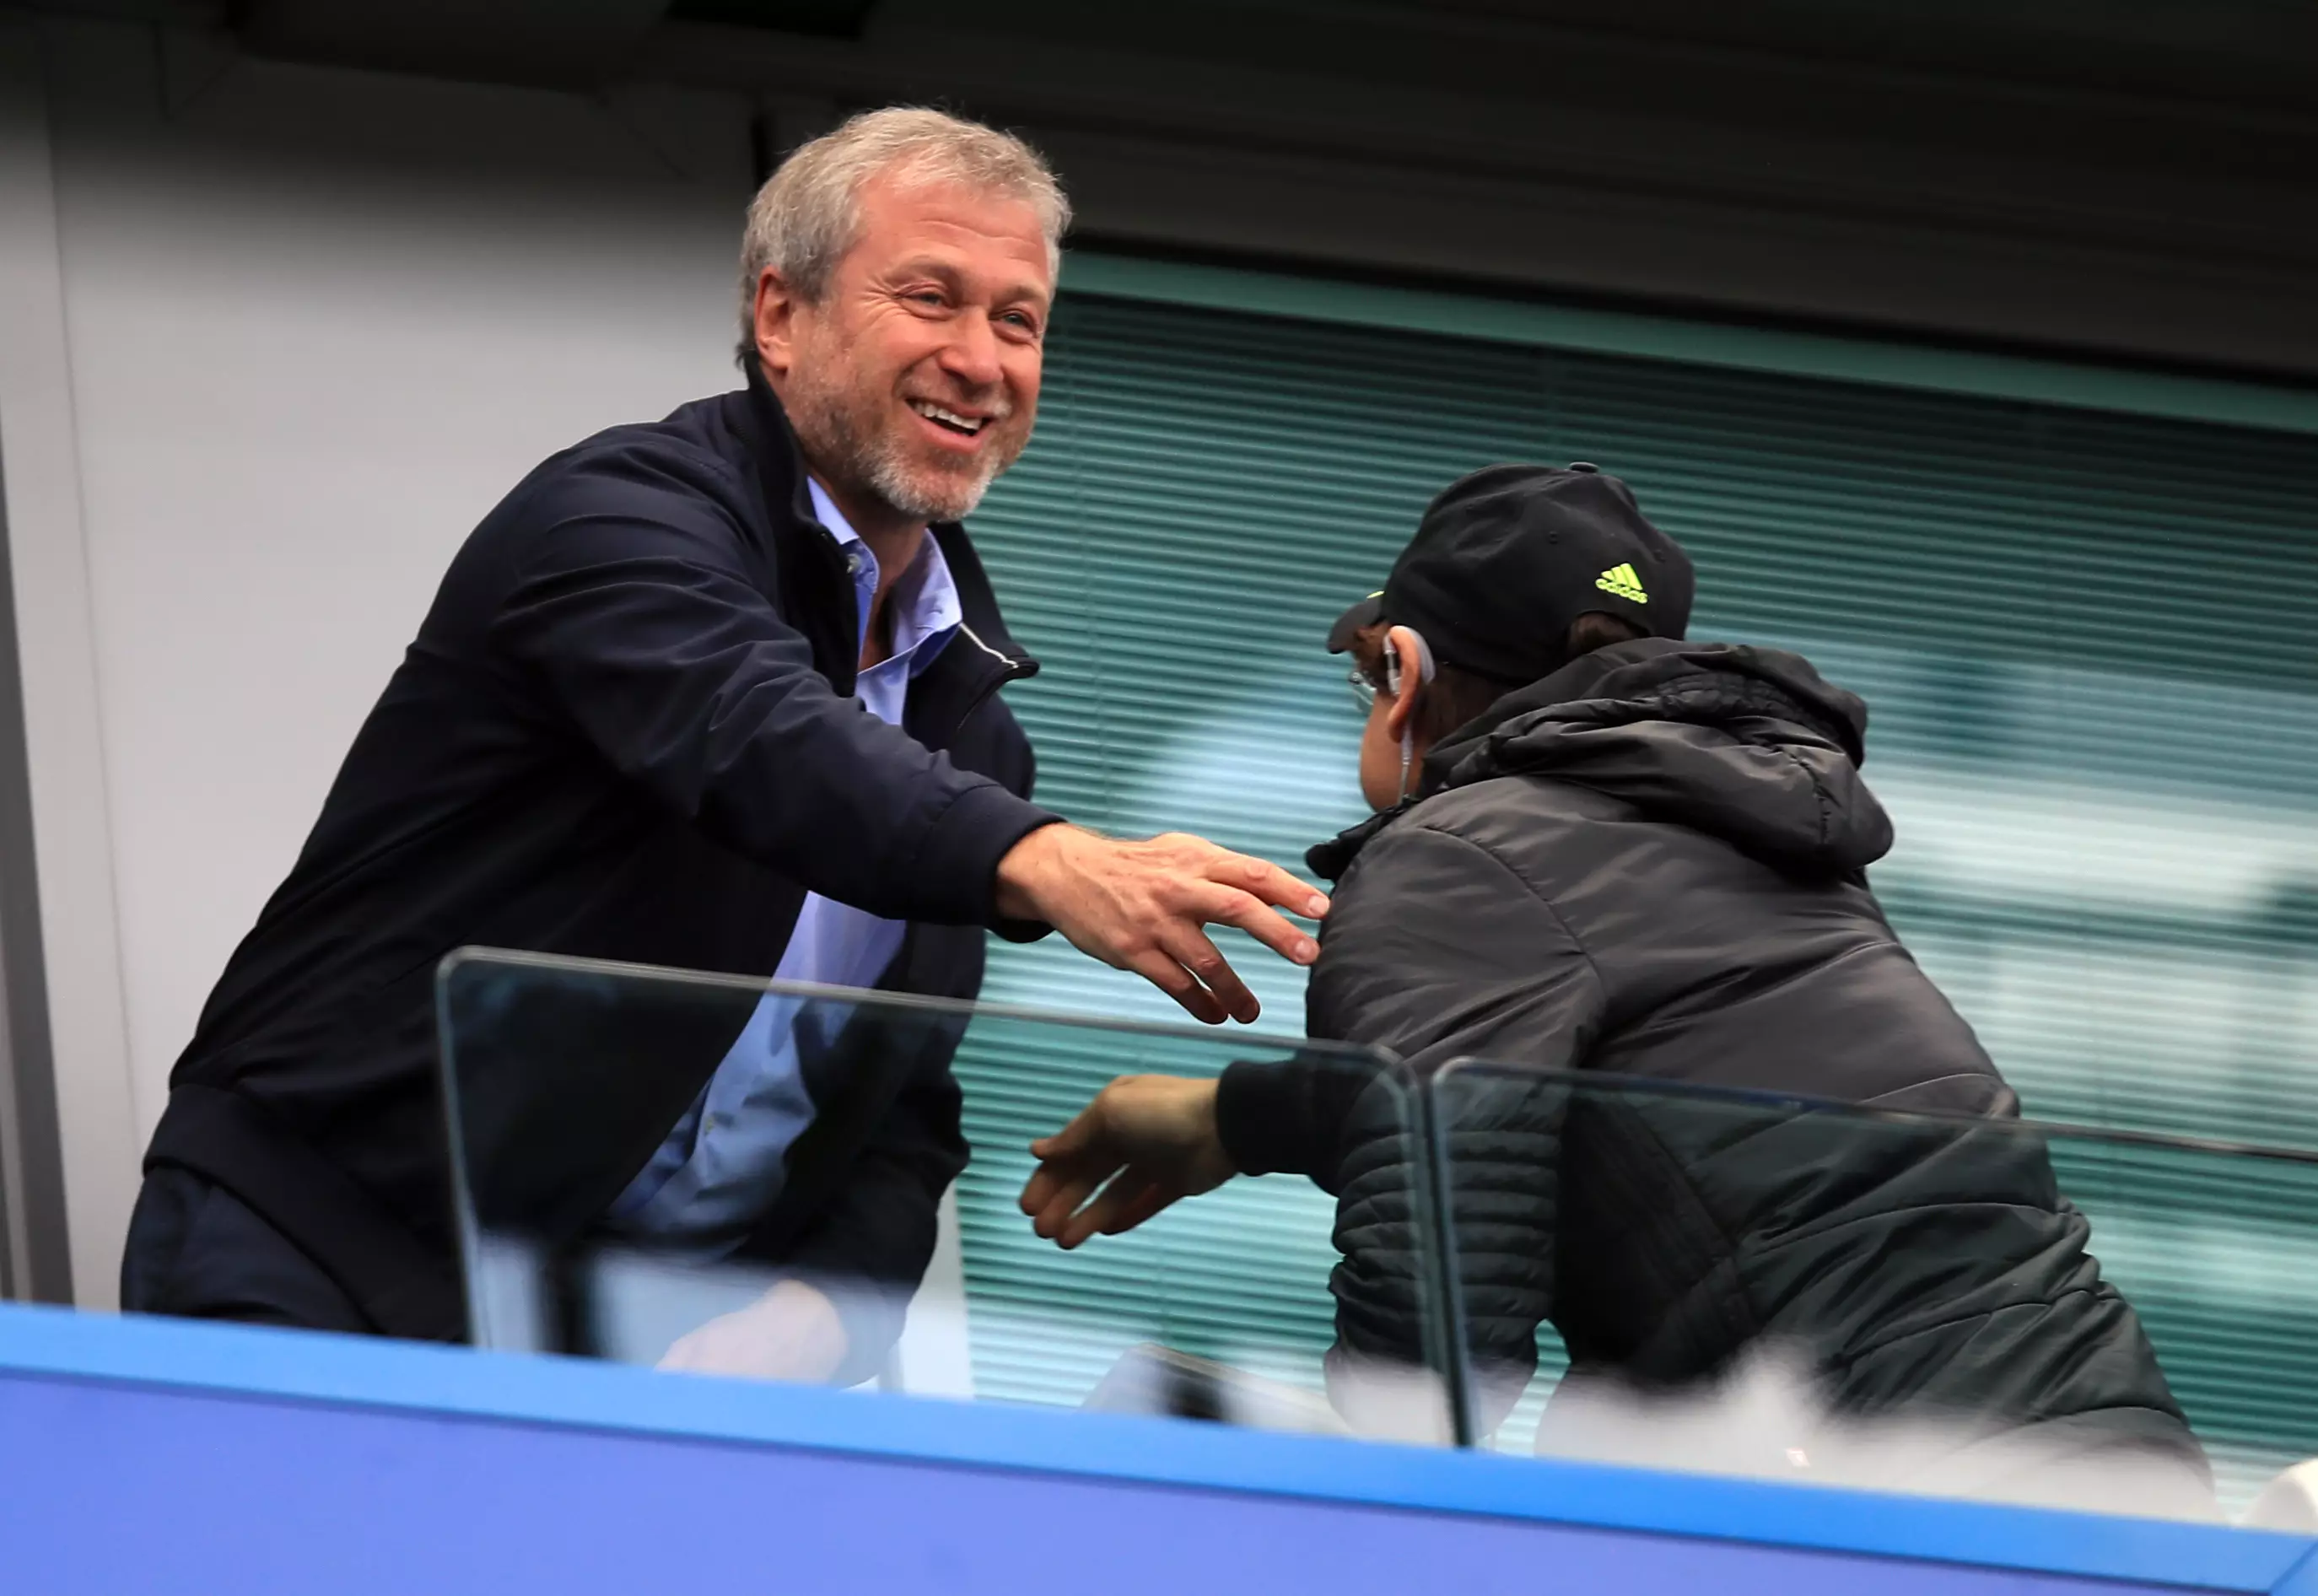 Abramovich isn't at Stamford Bridge as often now. Image: PA Images